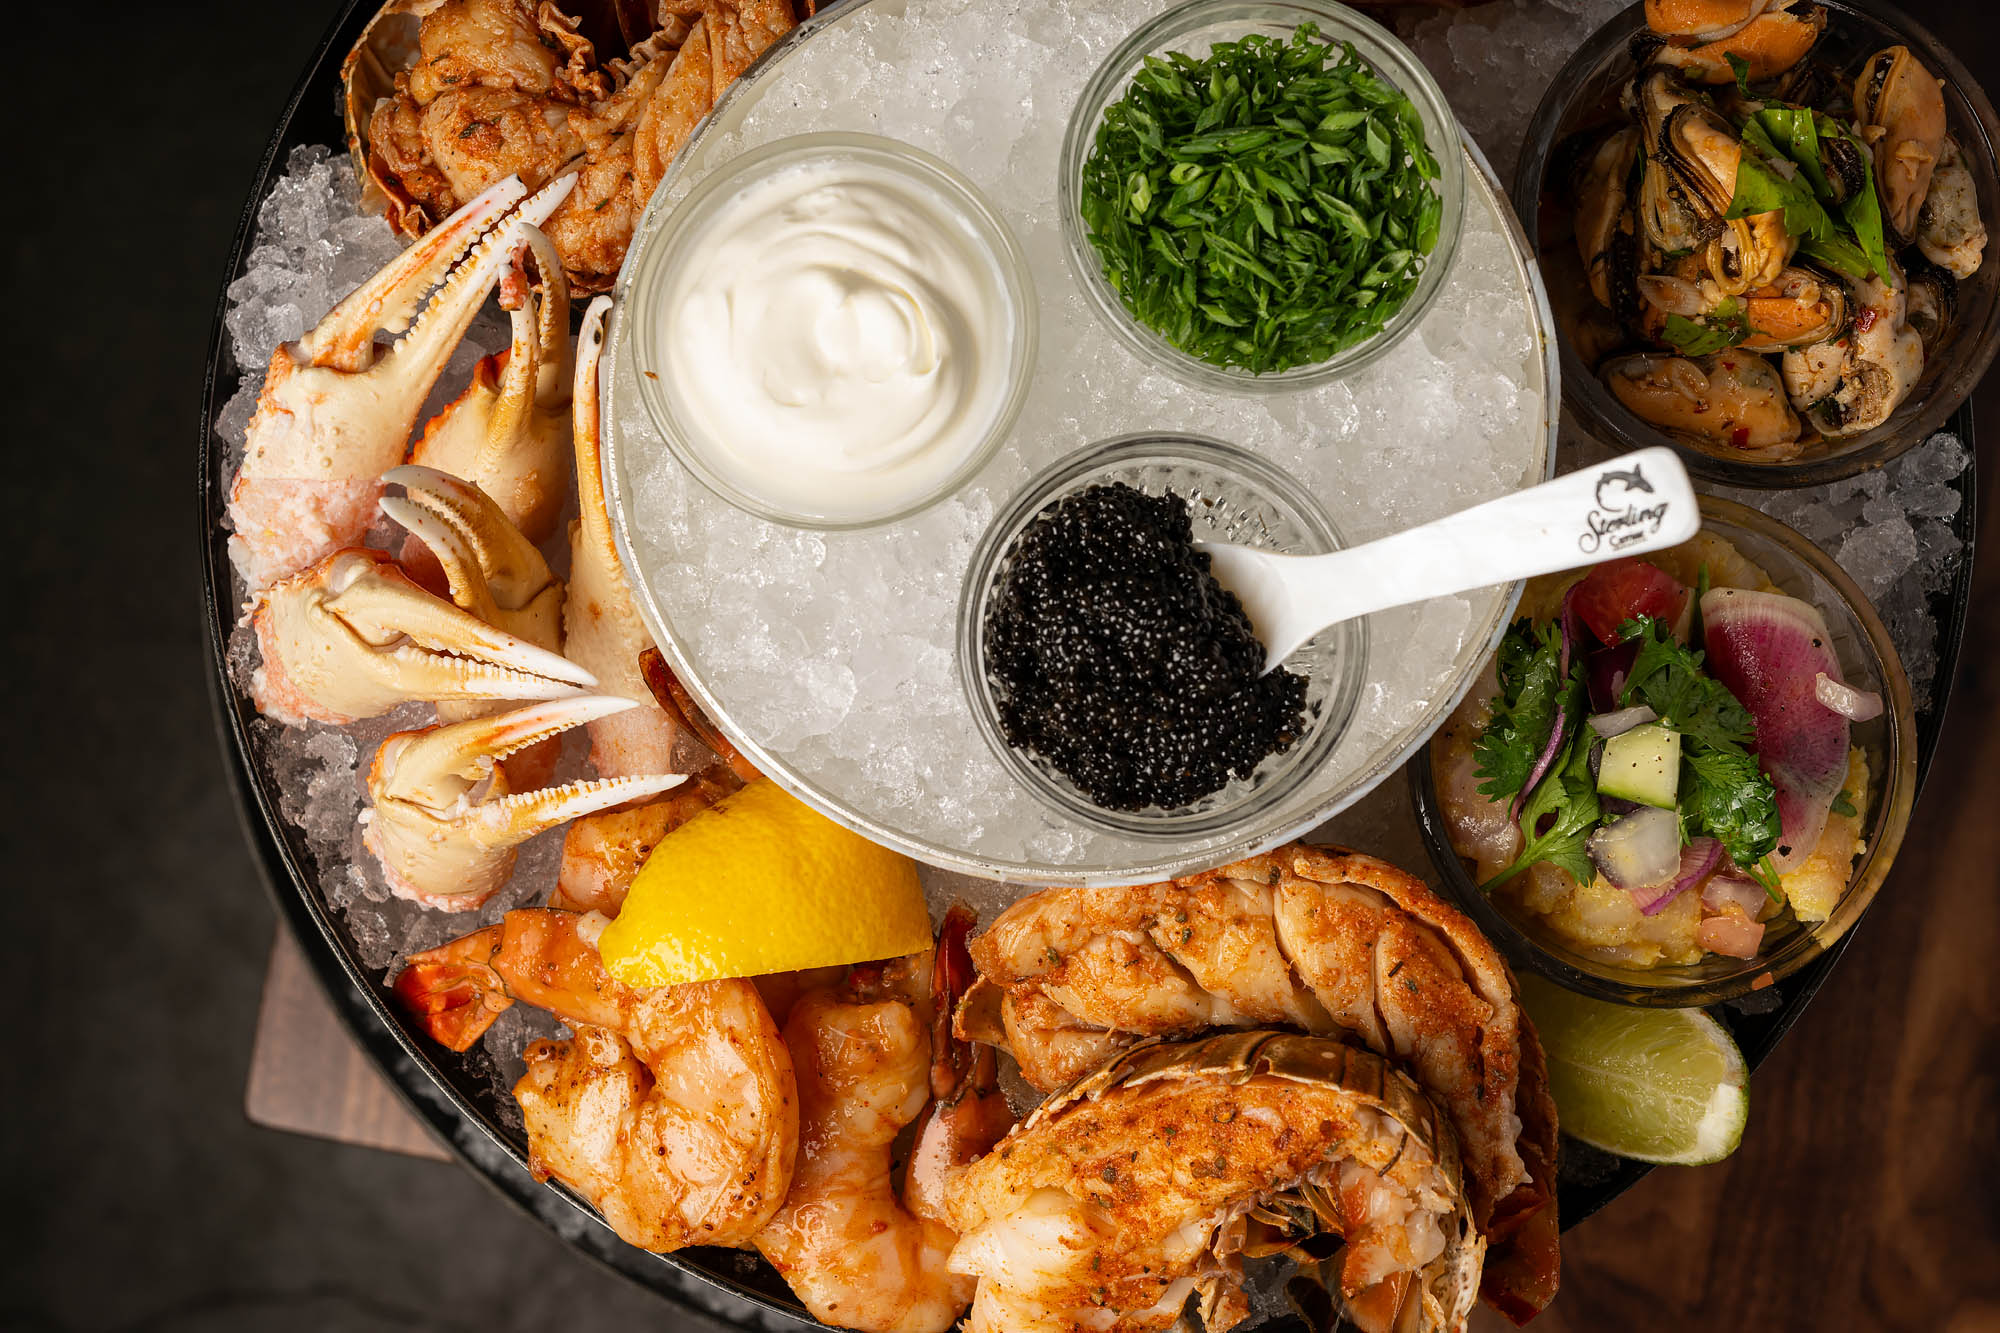 A top-down look at an icey platter of seafood and shellfish, with caviar, from a new restaurant named Joyce in Los Angeles.